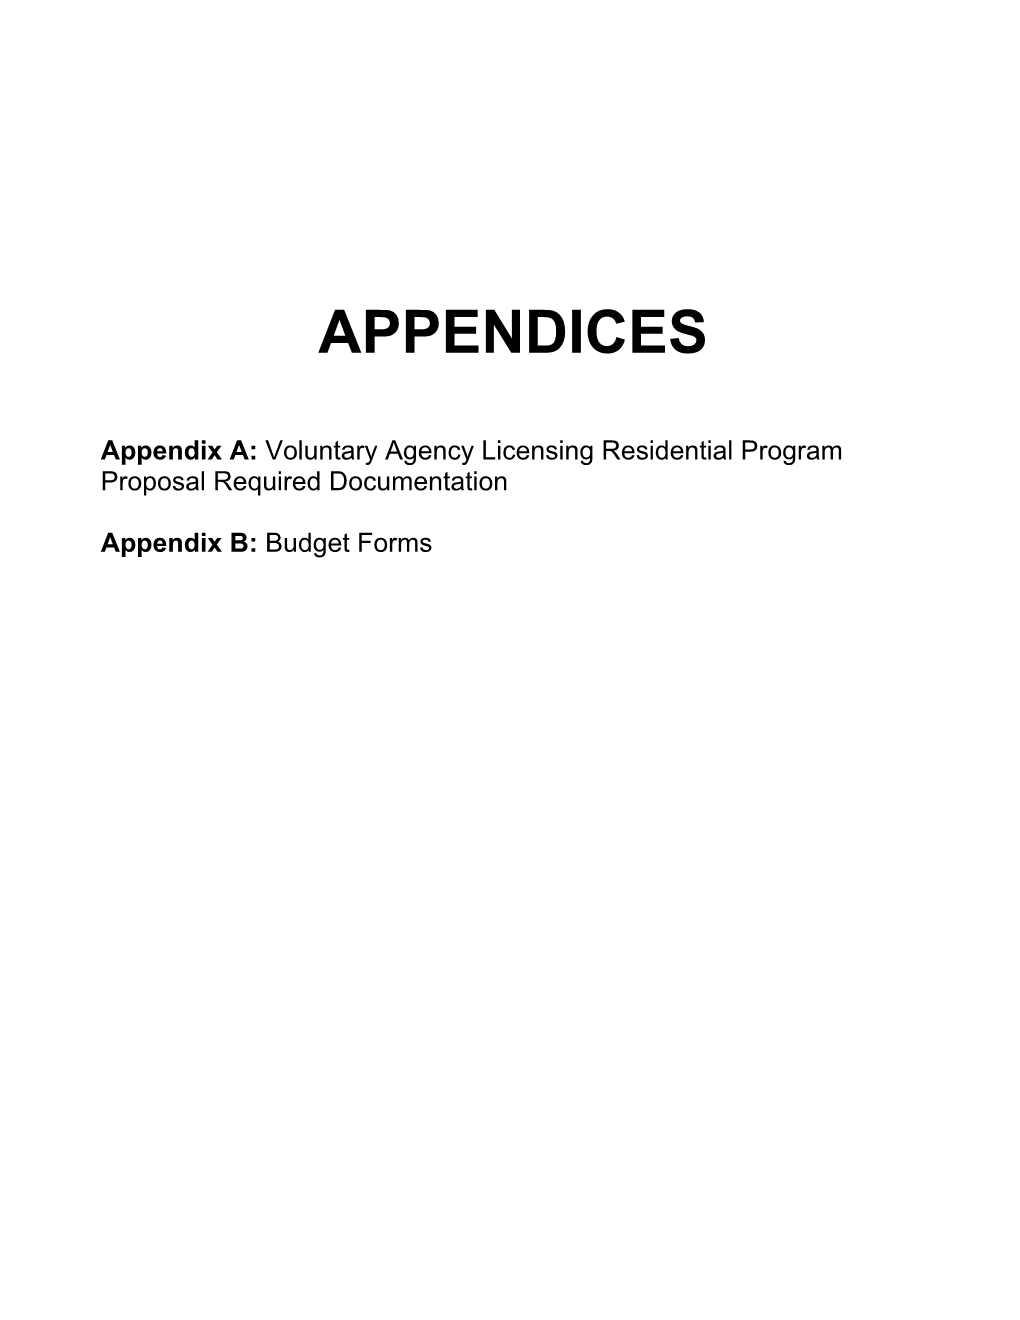 Appendix A: Voluntary Agency Licensing Residential Program Proposal Requireddocumentation